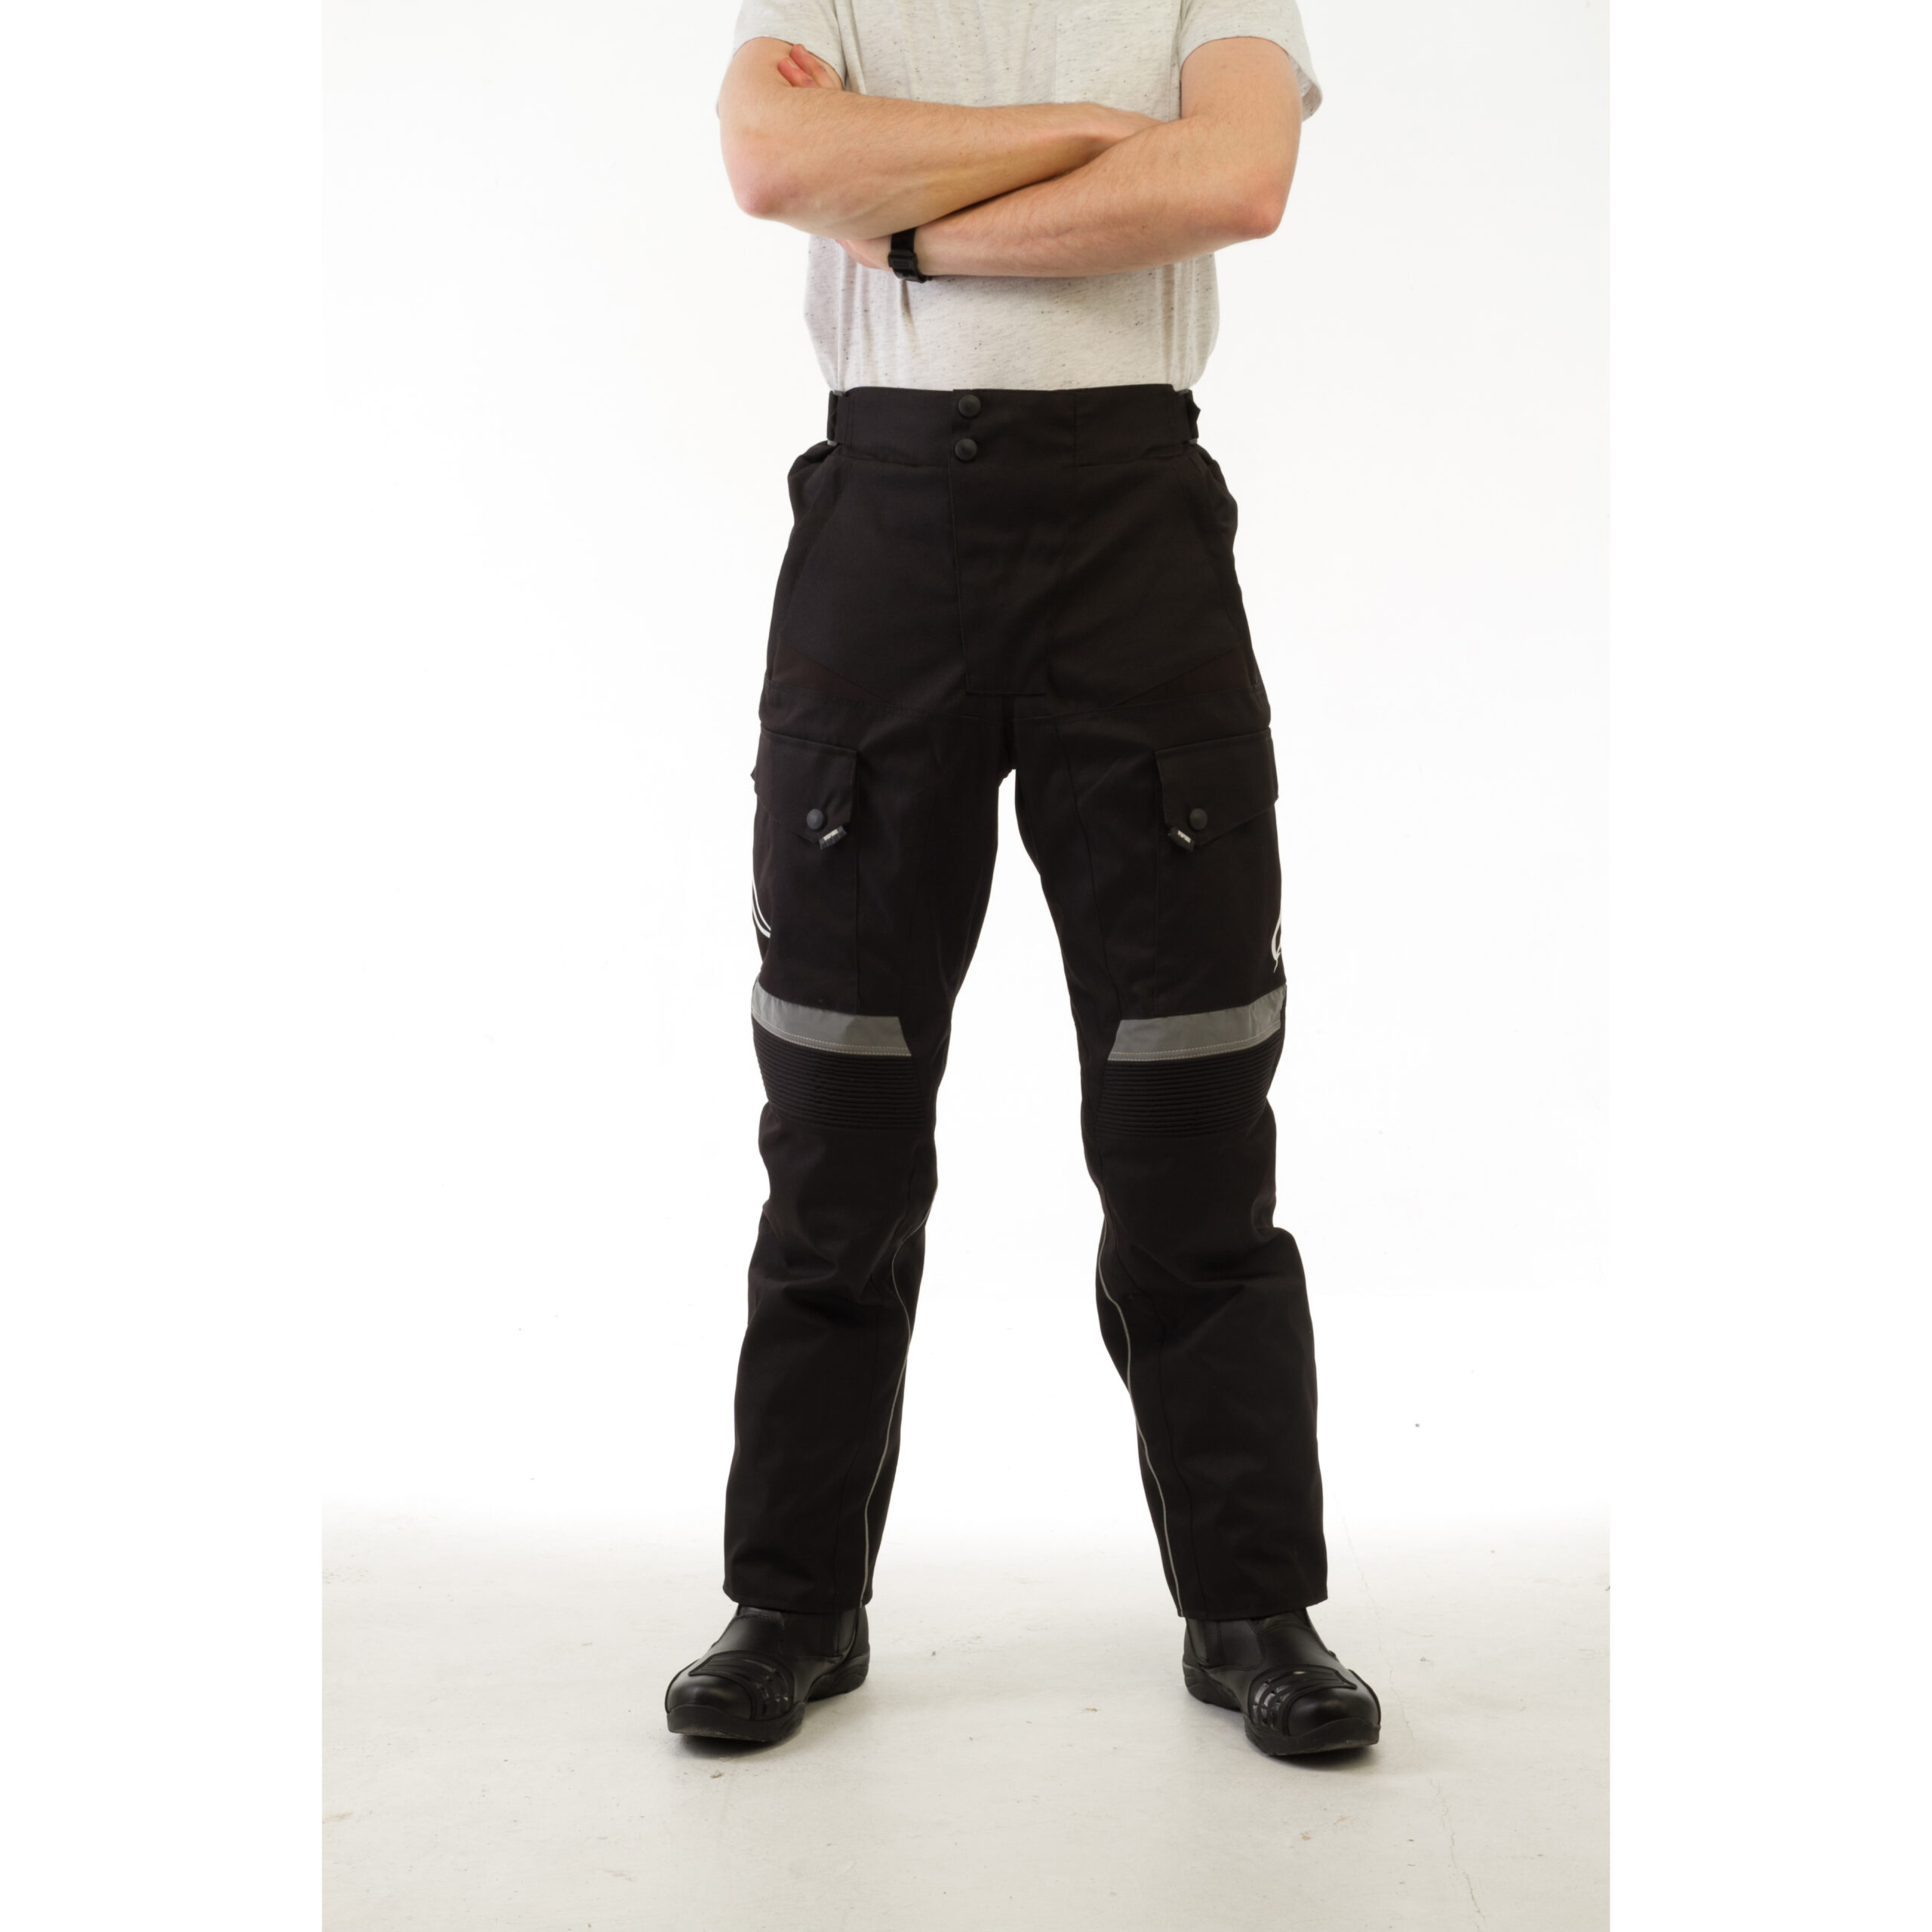 VIPER APEX CE MENS TROUSER Waterproof Textile Motorcycle Trousers ...